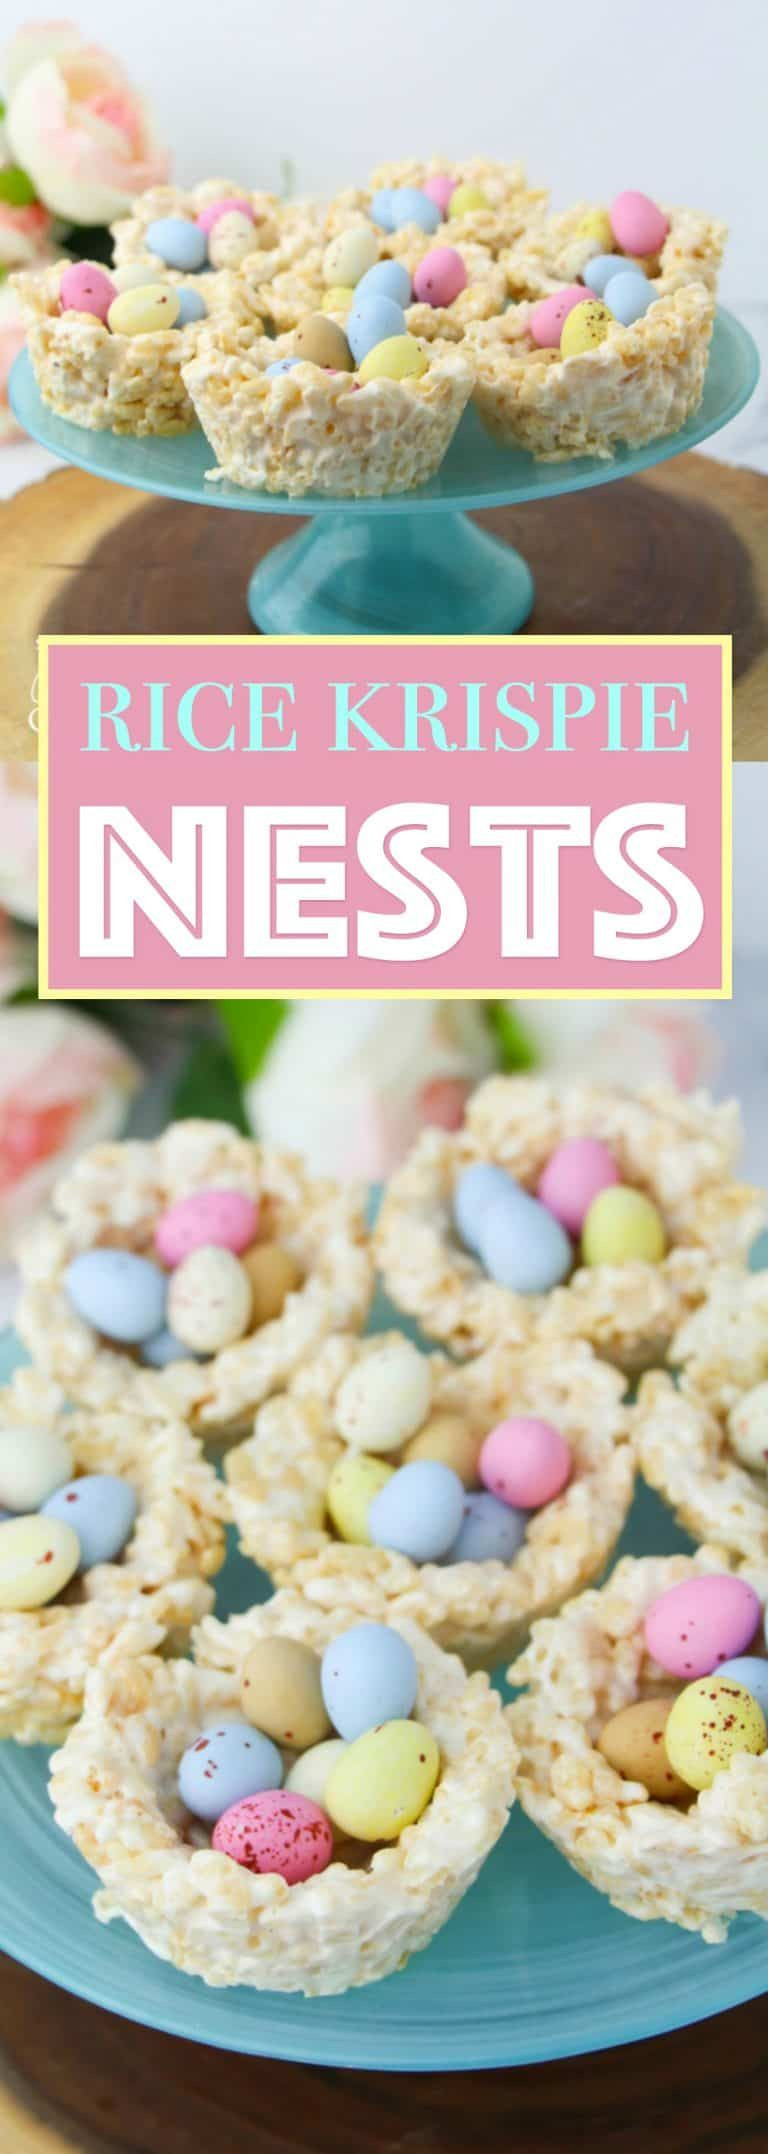 Quick And Easy Easter Desserts
 Rice Krispie Nests a quick and easy no bake Easter treat